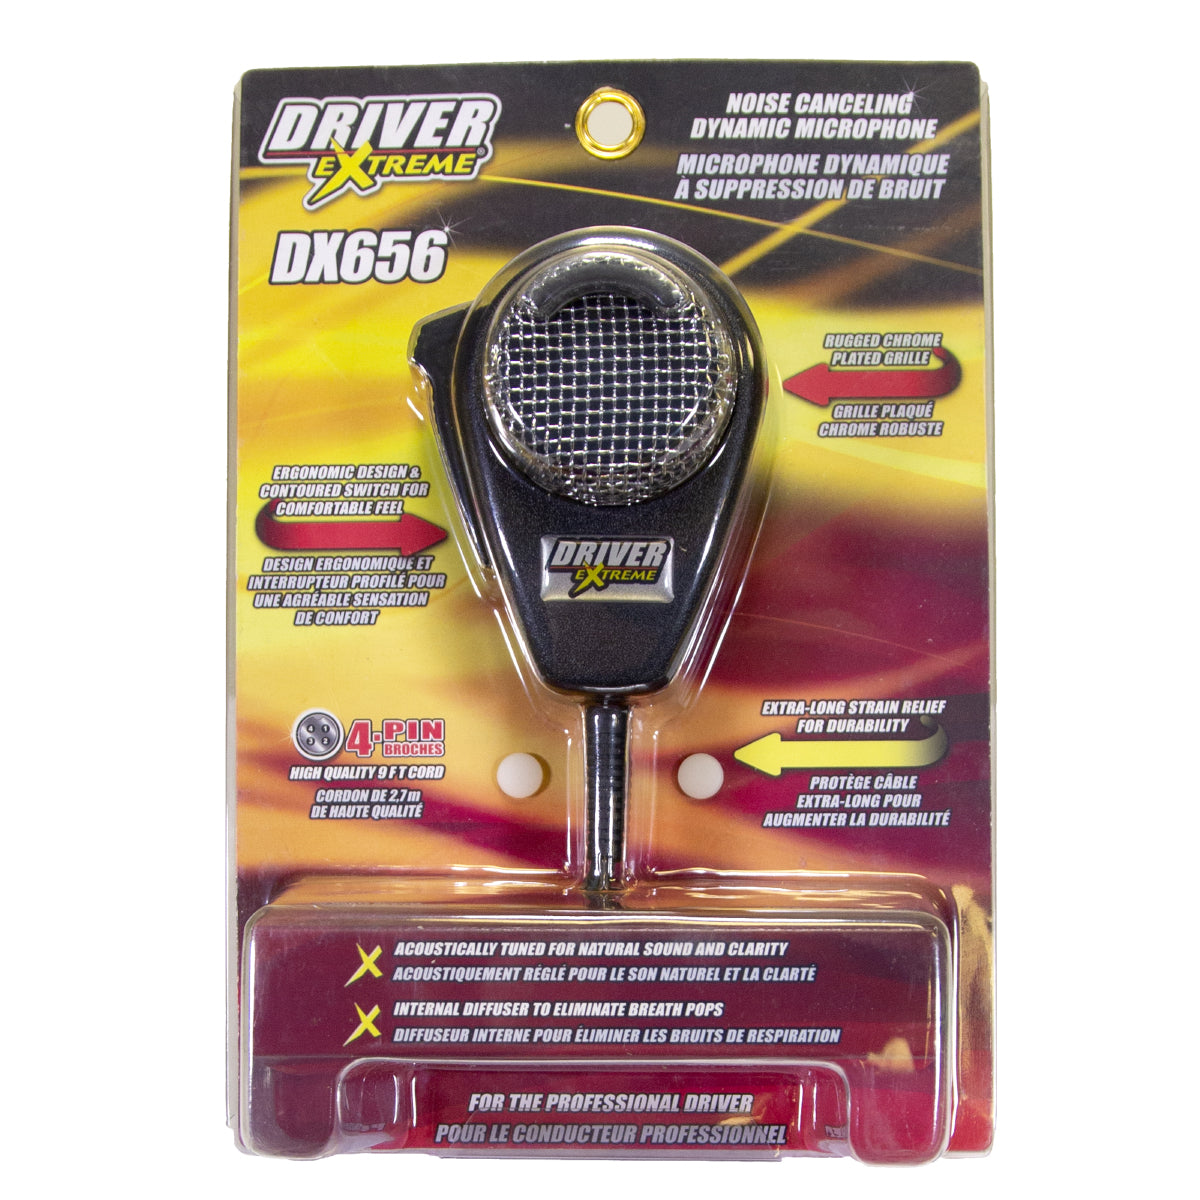 Cb Distributing • Driver Extreme Drx 6560 Noise Cancelling Dynamic 4 Pin Microphone • Auto 